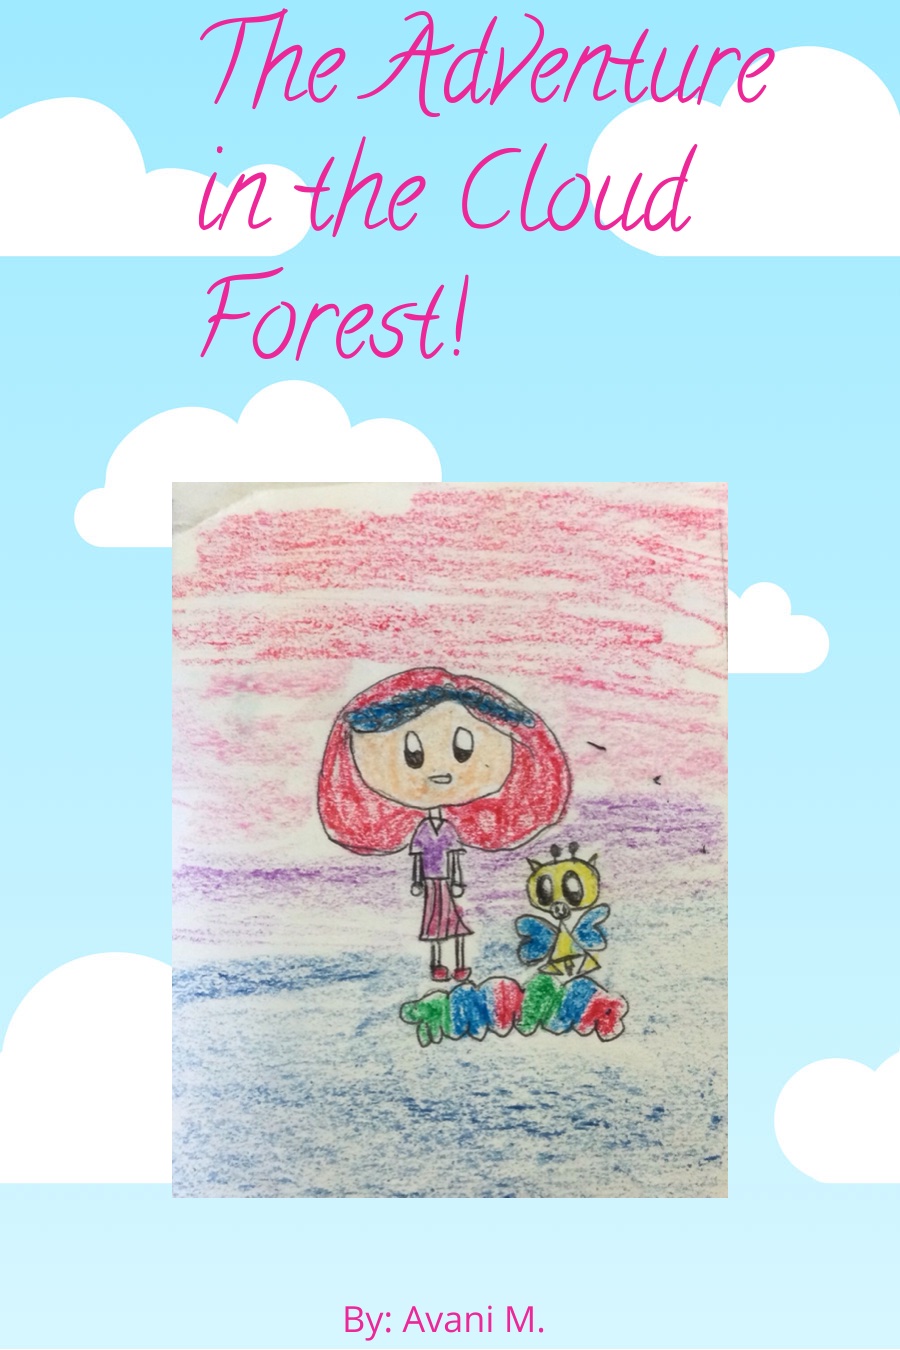 The Adventure in the Cloud Forest by Avani M